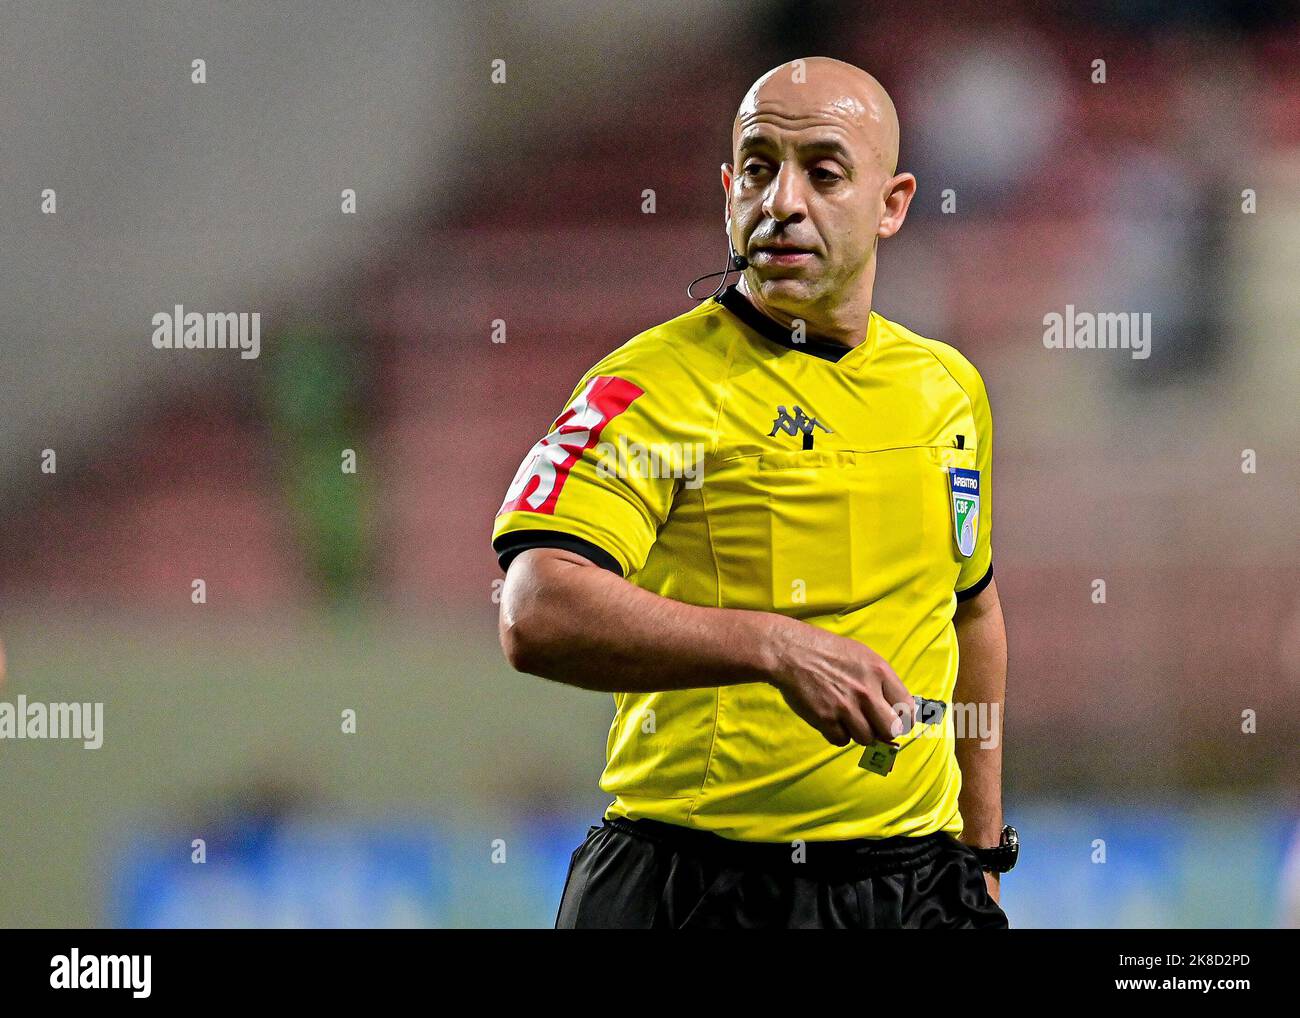 Jean pierre goncalves lima hi-res stock photography and images - Alamy